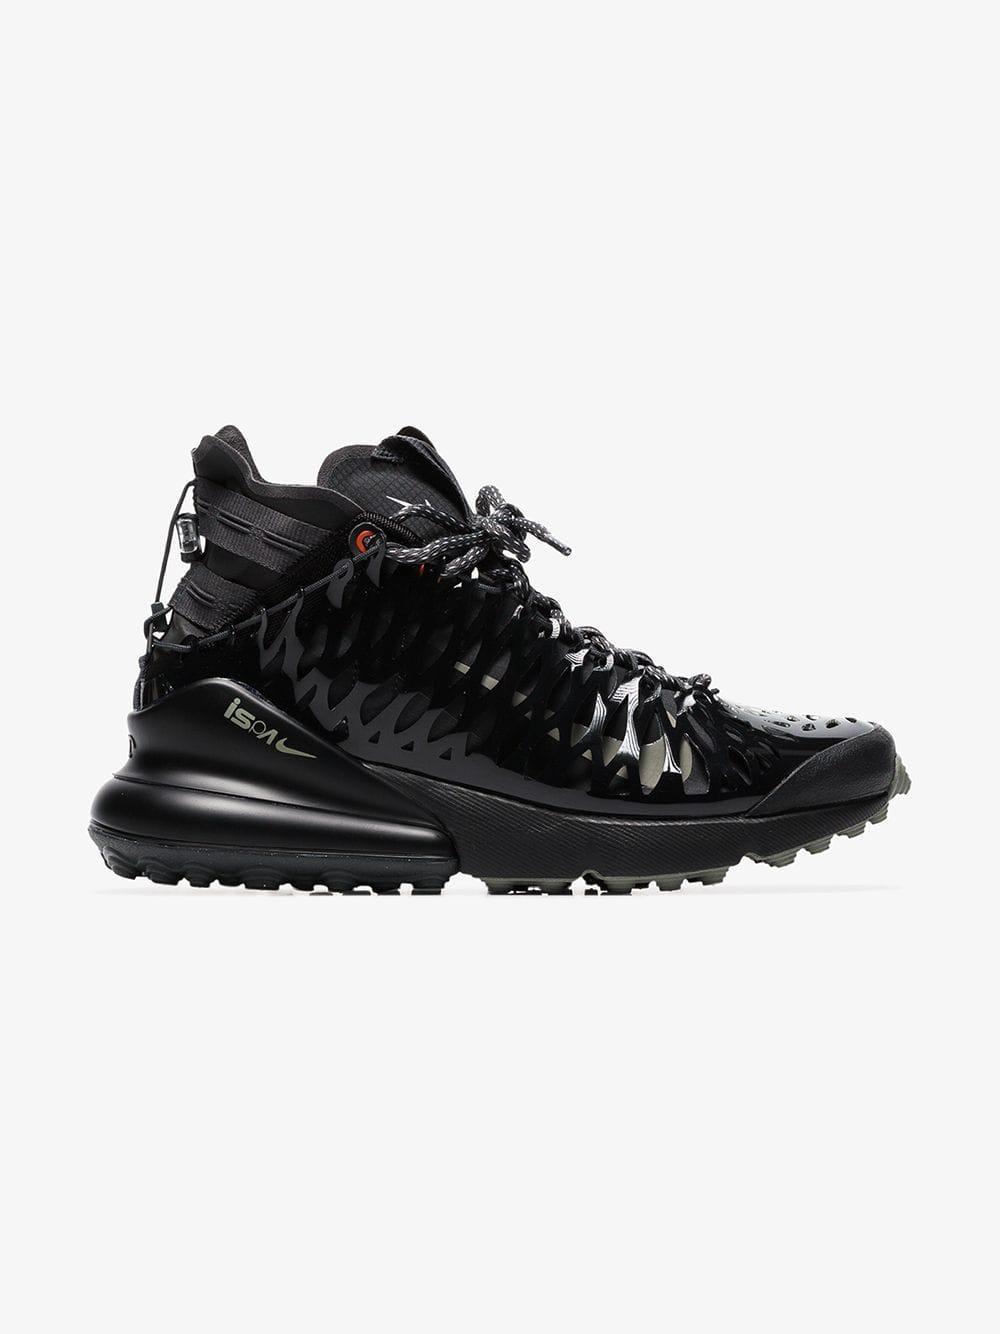 Nike Air Max Shoes High Tops Online 